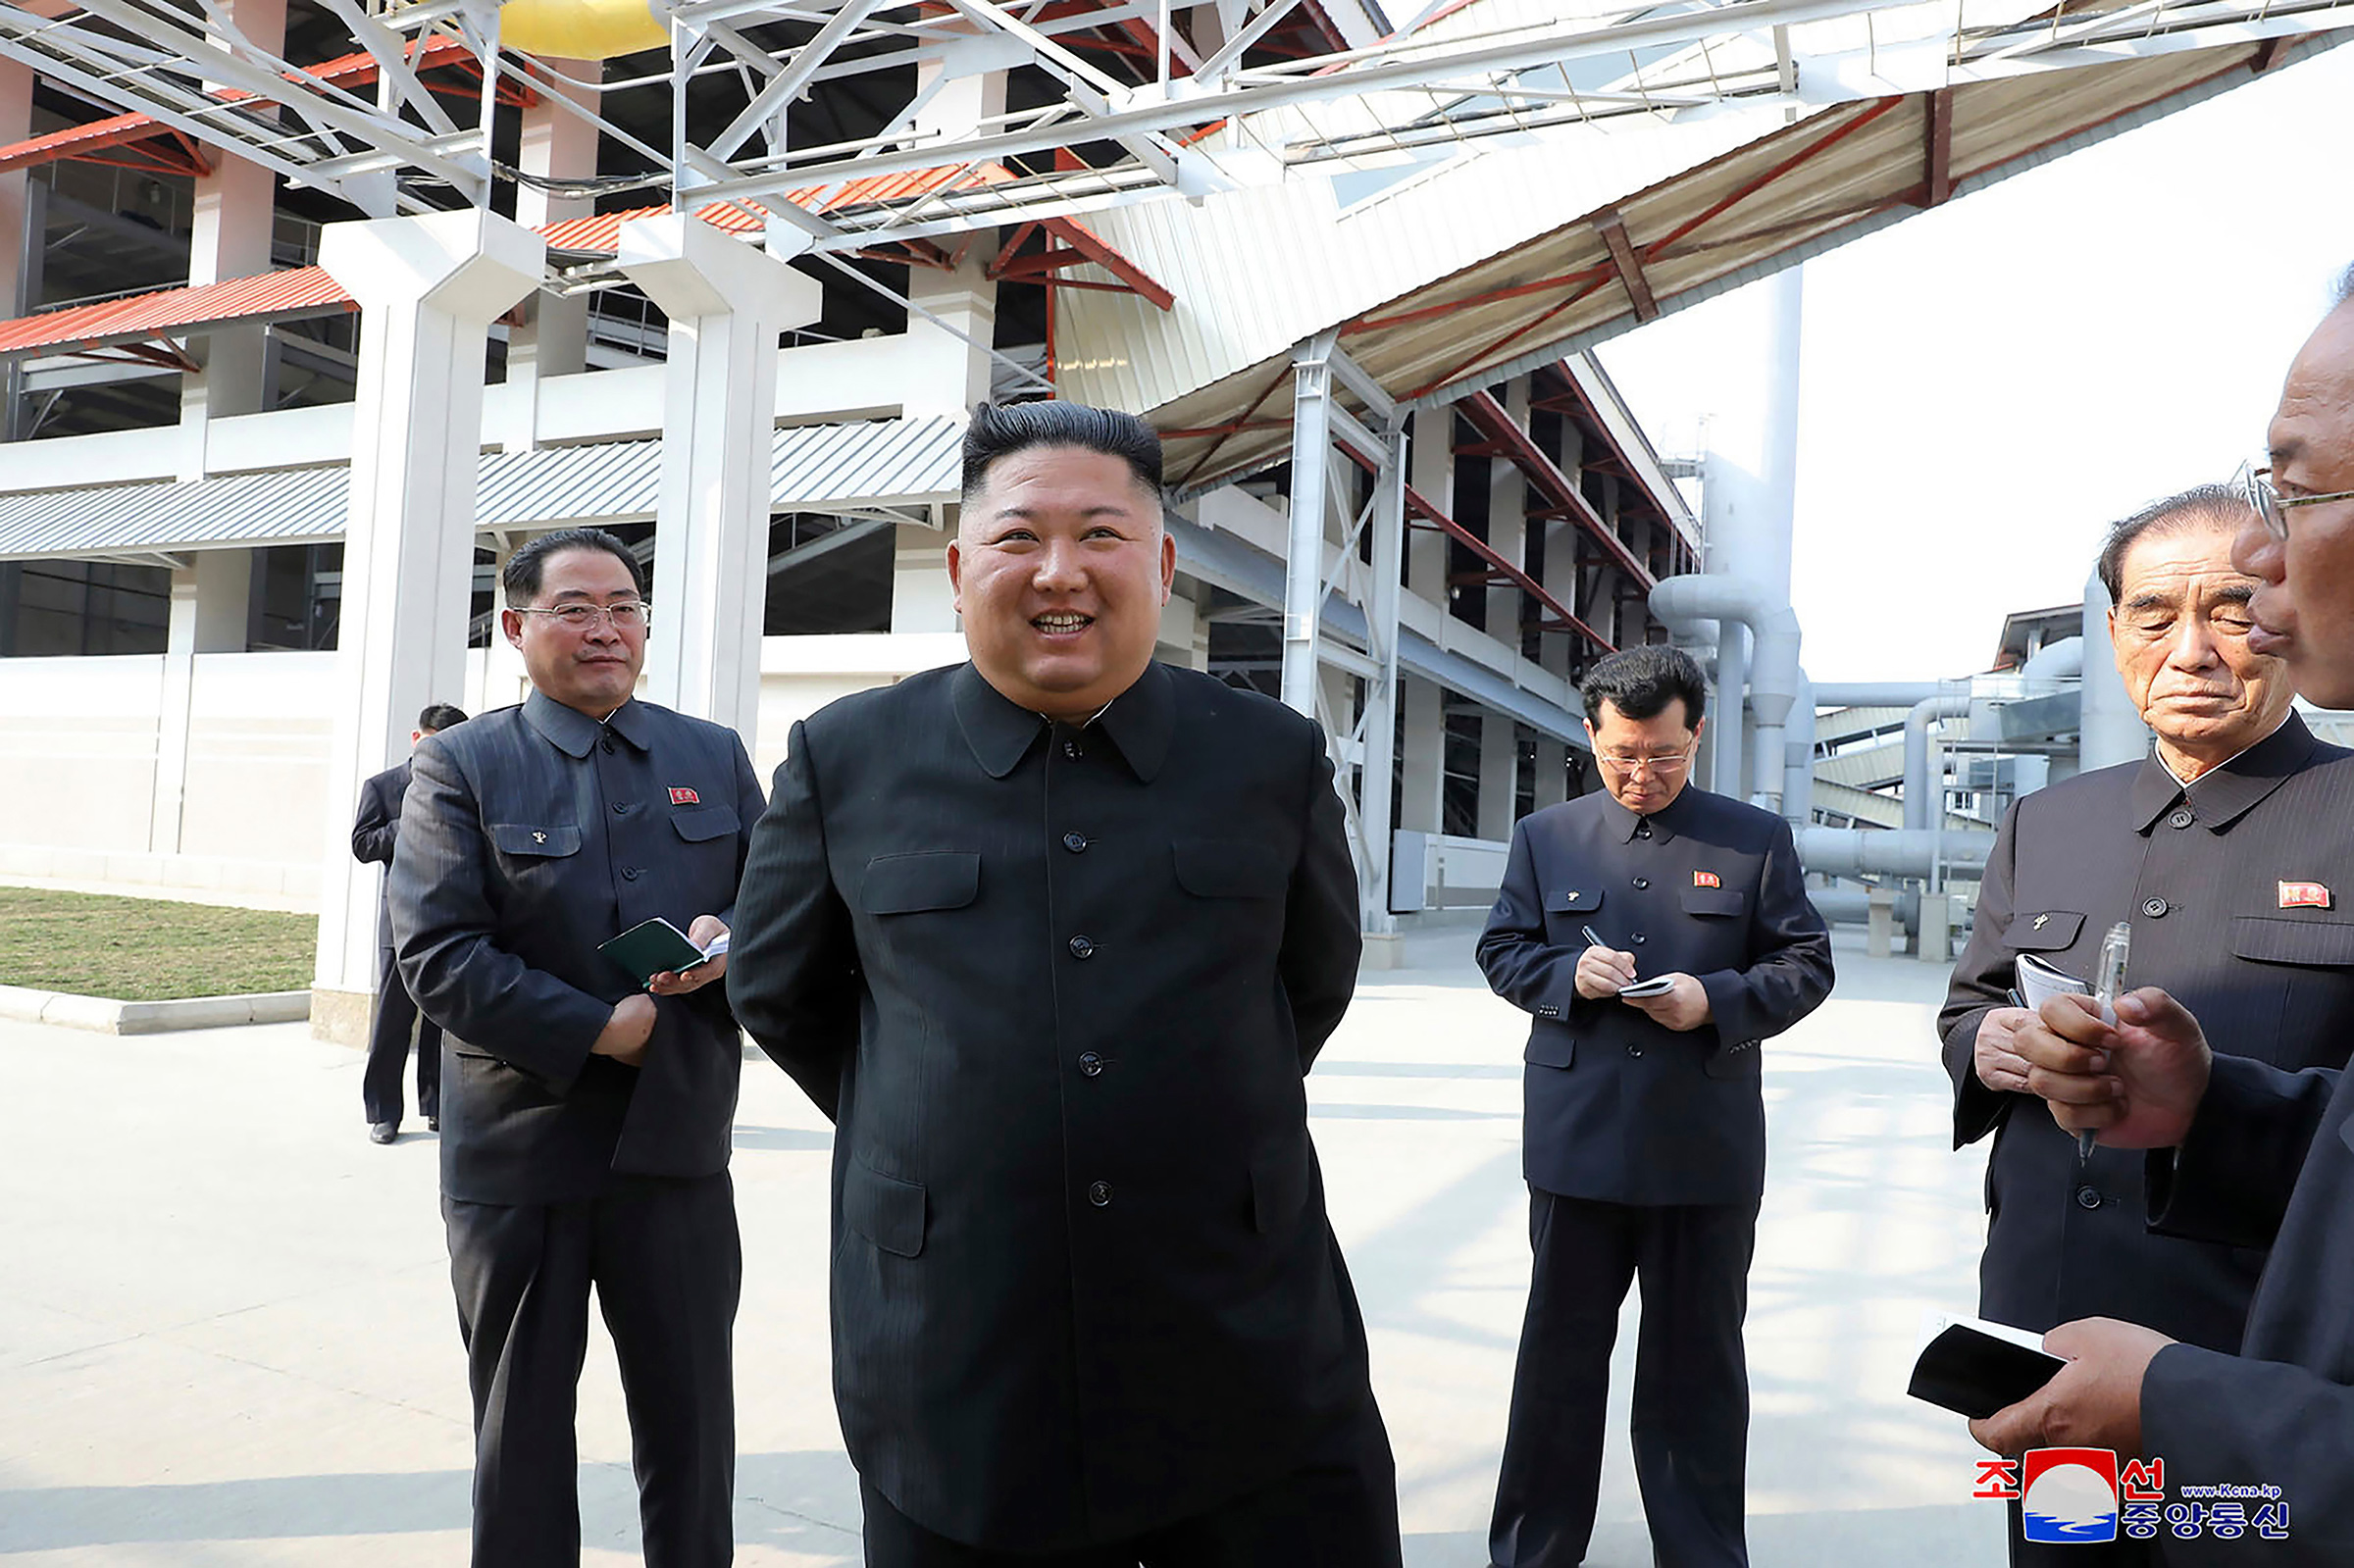 In this Friday, May 1 photo provided by the North Korean government, North Korean leader Kim Jong Un, center, visits a fertilizer factory in Sunchon, South Pyongan province, near Pyongyang. (Korean Central News Agency/AP)